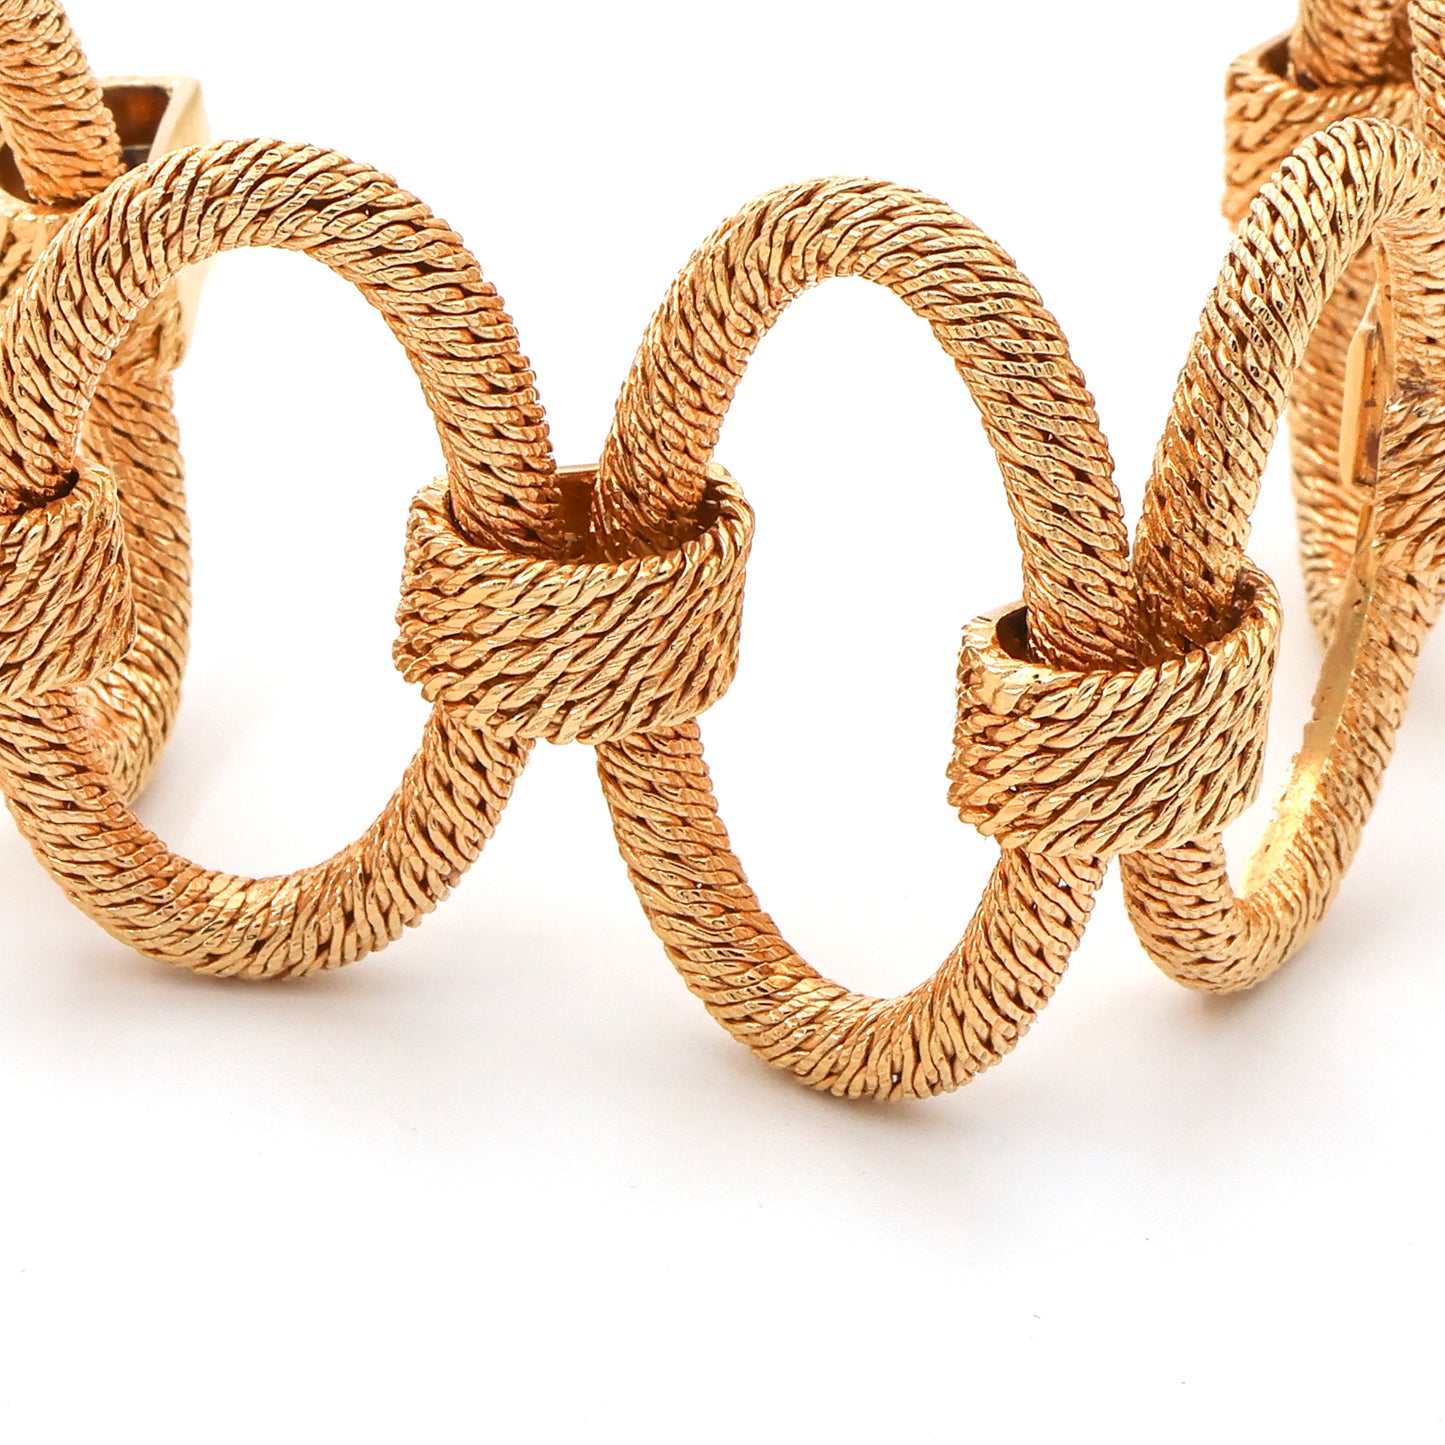 Converted Rolex 18k Yellow Gold Oval Link Bracelet with Twisted Rope Texture